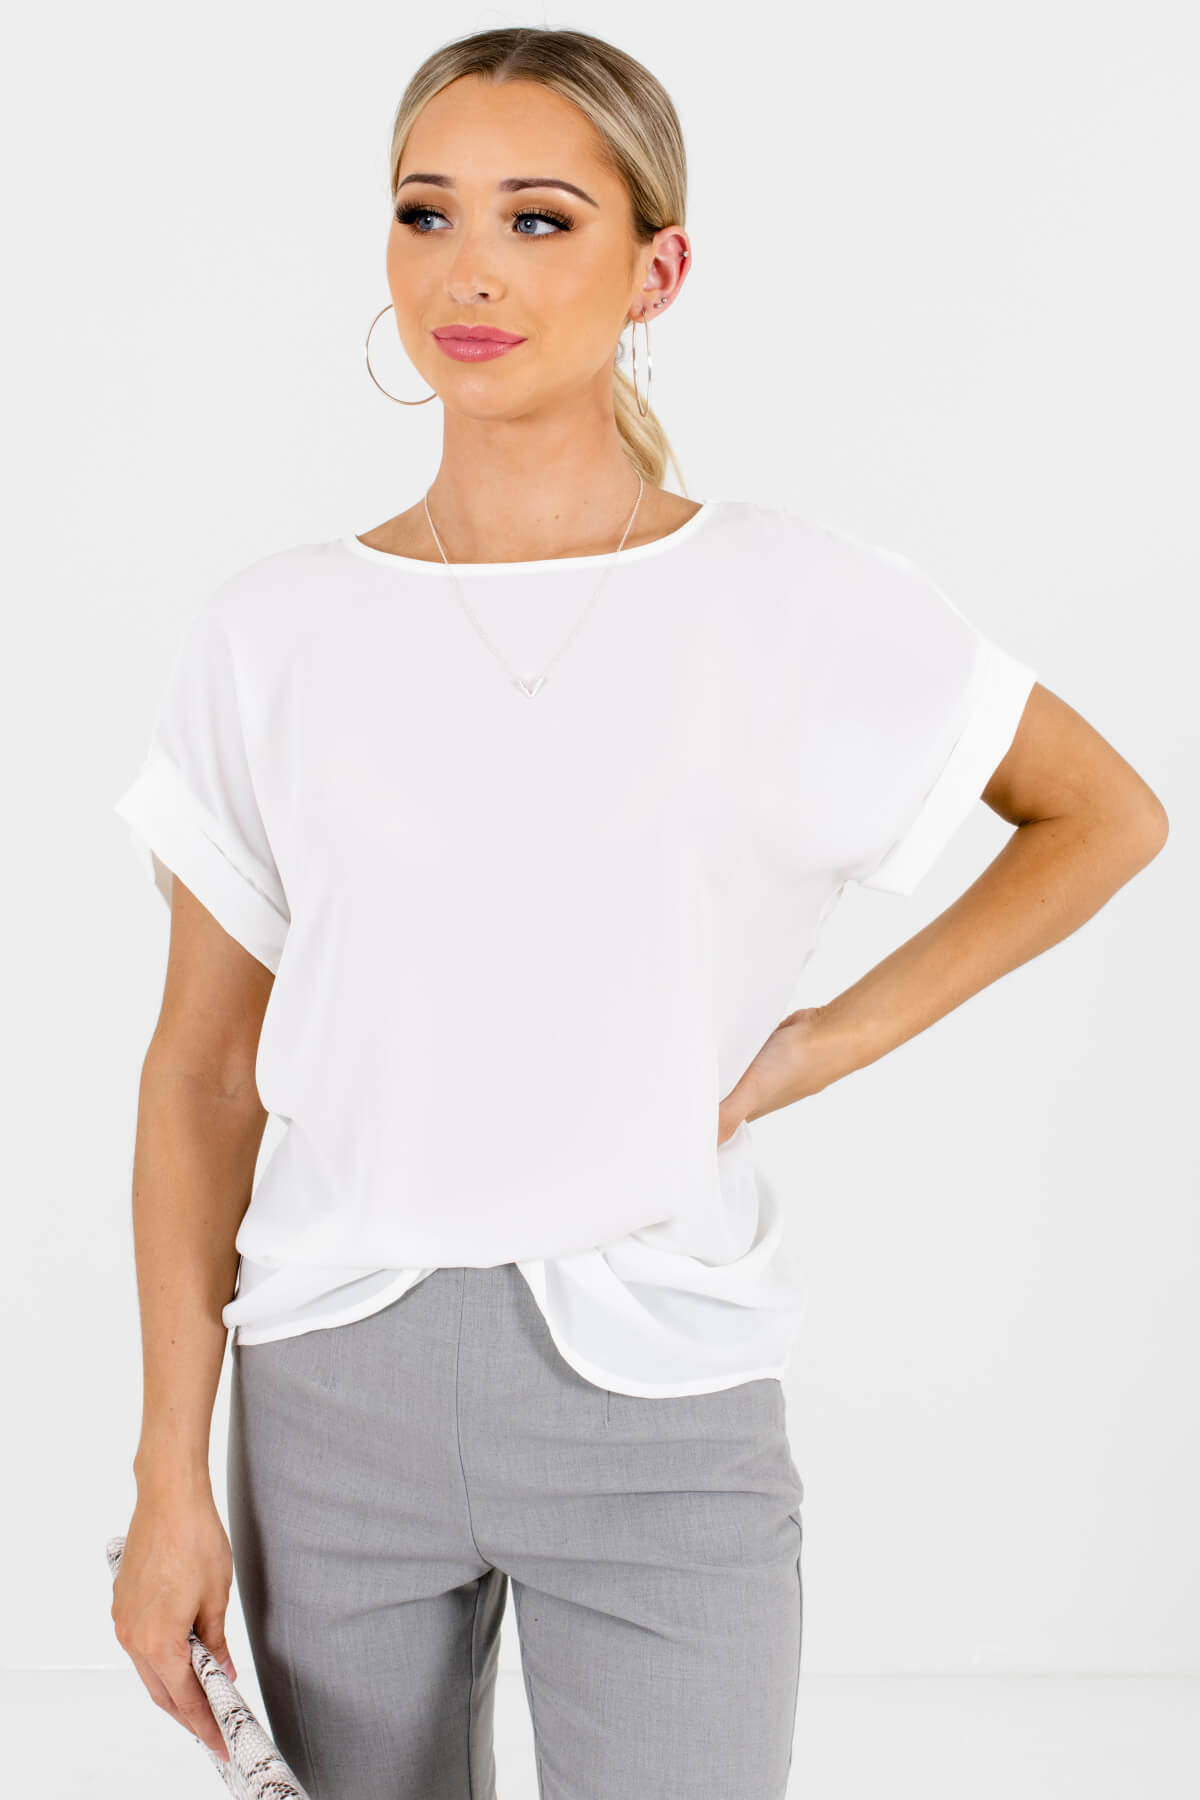 White Lightweight and Flowy Boutique Blouses for Women